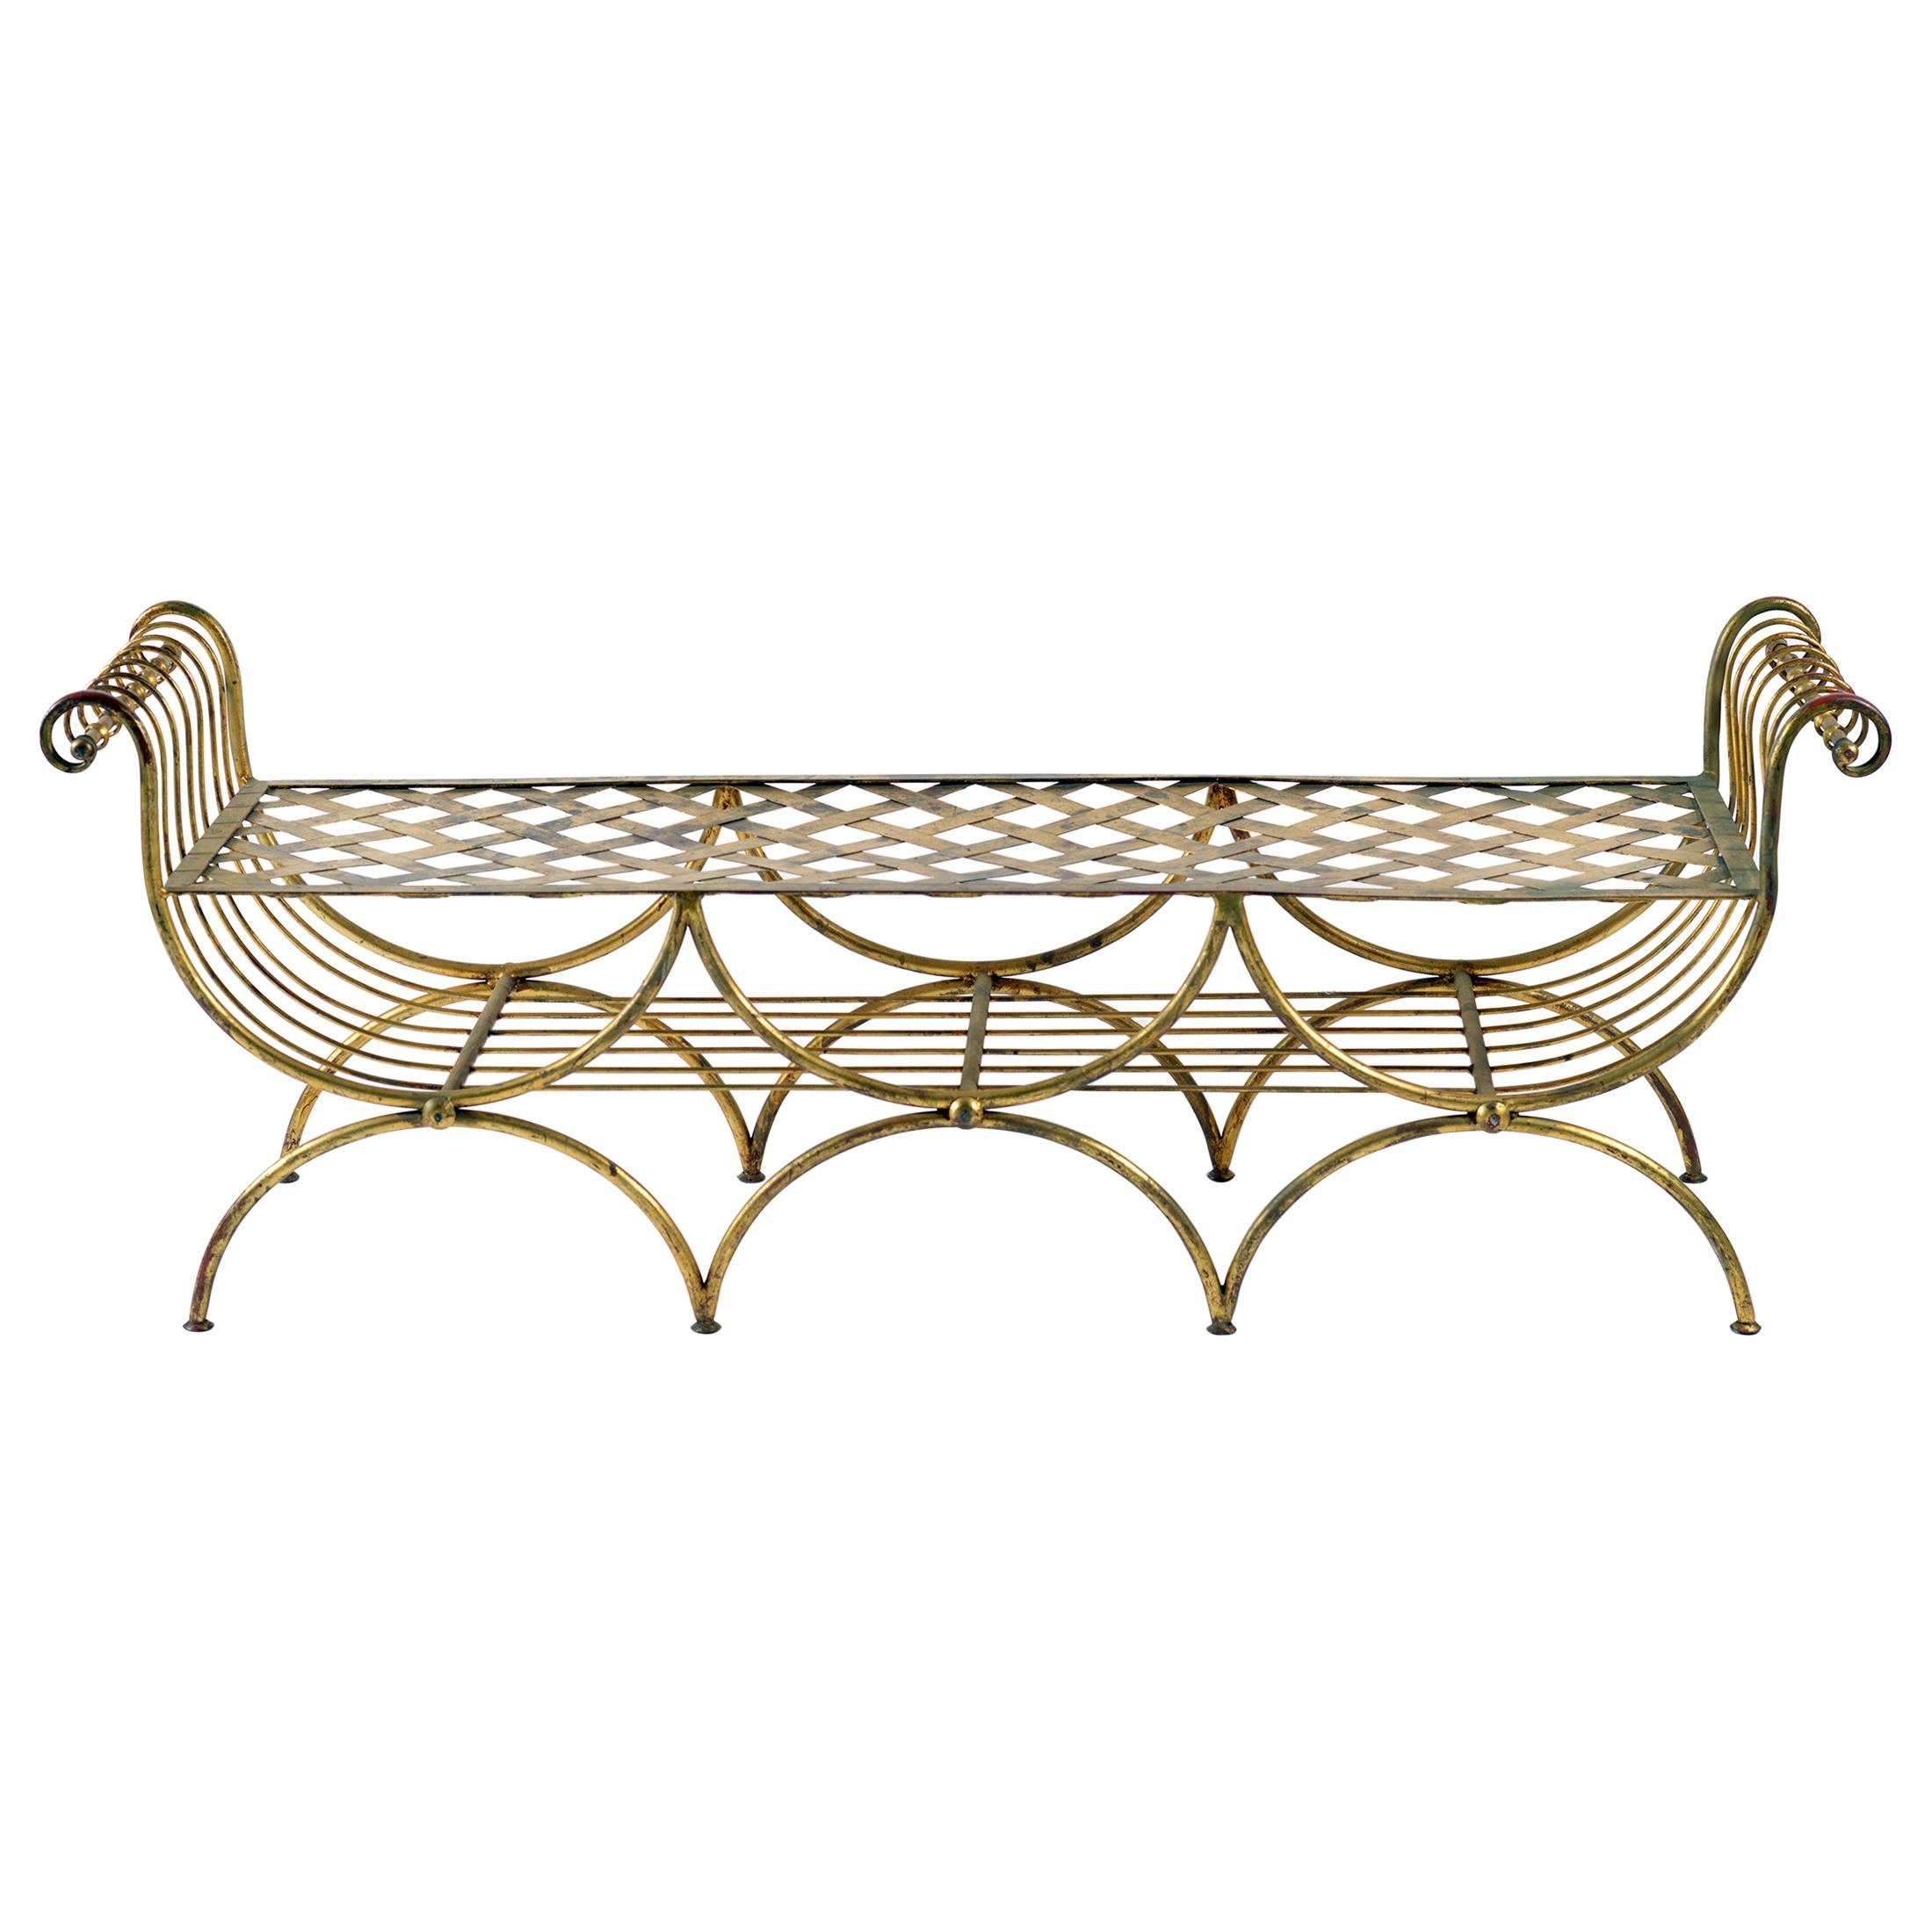 Midcentury French Wrought Iron and Gilded with Gold Leaf Bench or Small Sofa